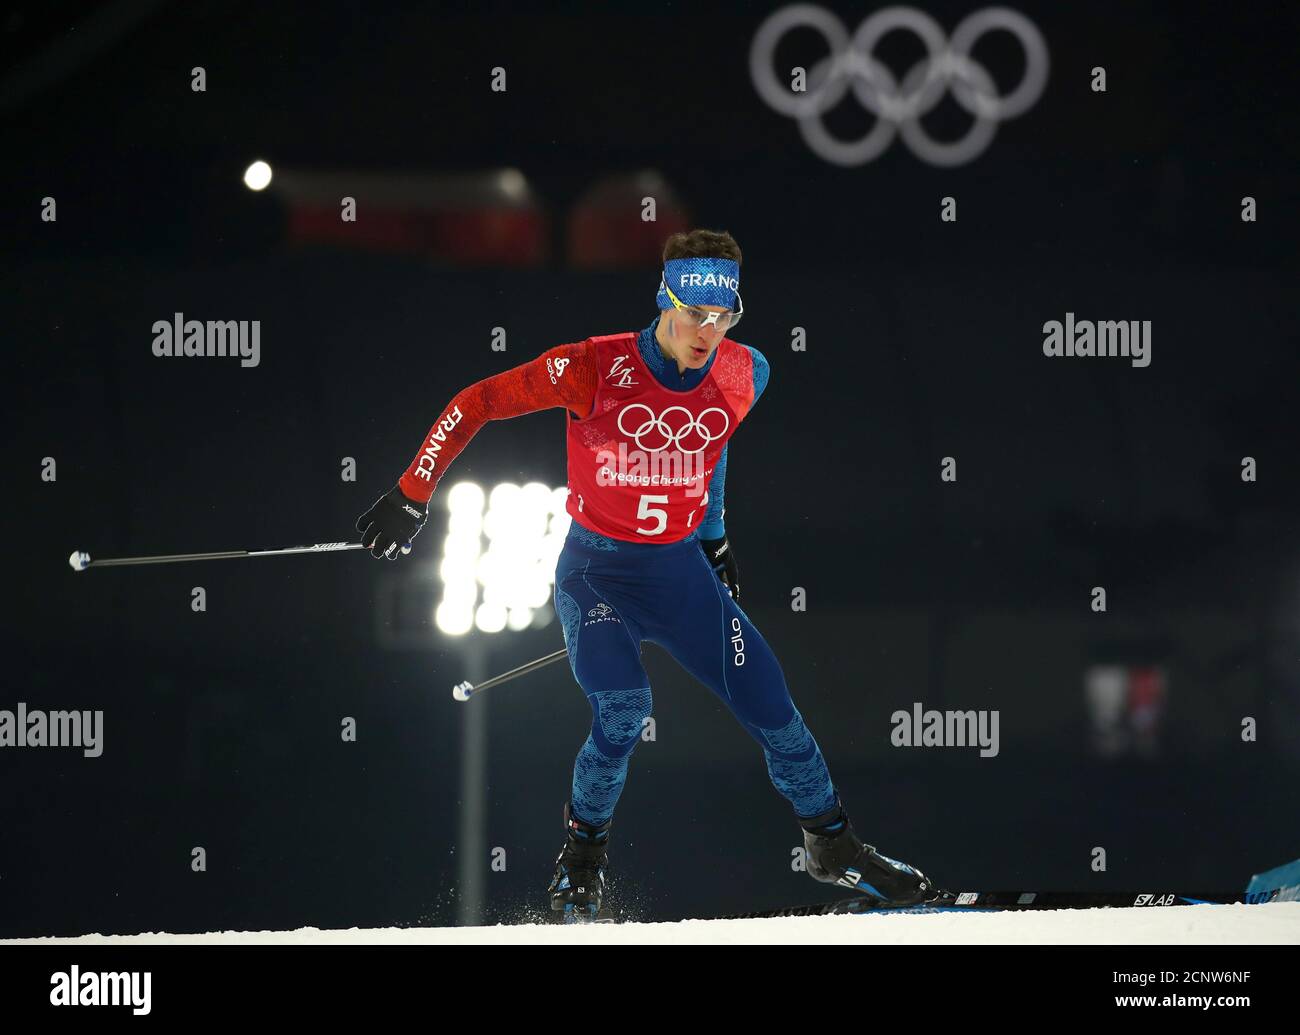 Nordic Combined Events - Pyeongchang 2018 Winter Olympics - Men's Team 4 x 5 km Final - Alpensia Cross-Country Skiing Centre - Pyeongchang, South Korea - February 22, 2018 -  Antoine Gerard of France competes. REUTERS/Carlos Barria Stock Photo